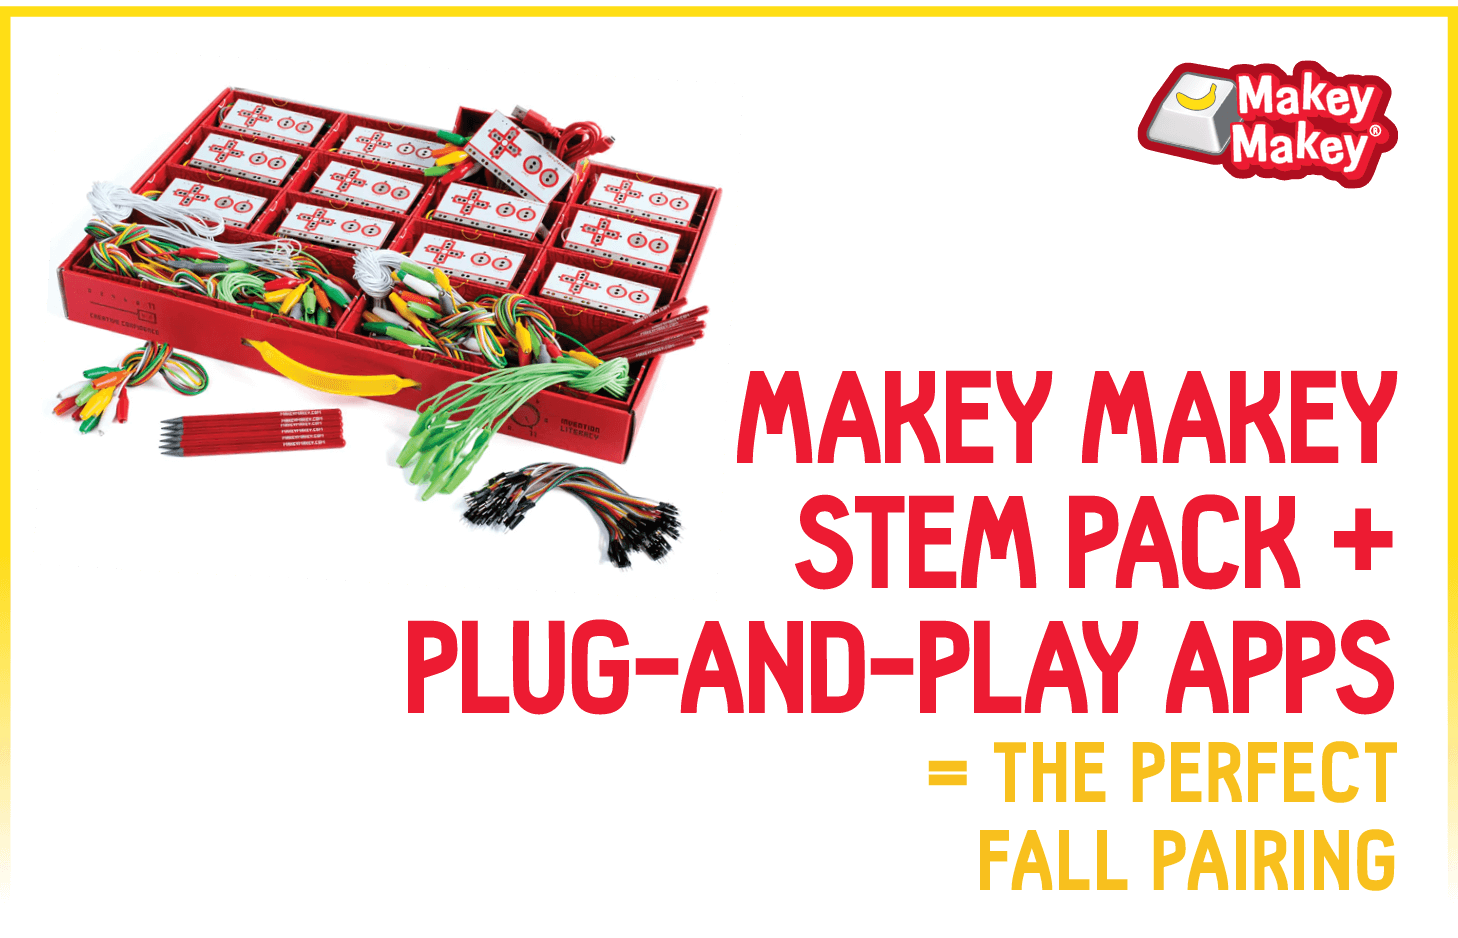 Makey makey stem pack and plug-and-play apps equal the perfect fall pairing.